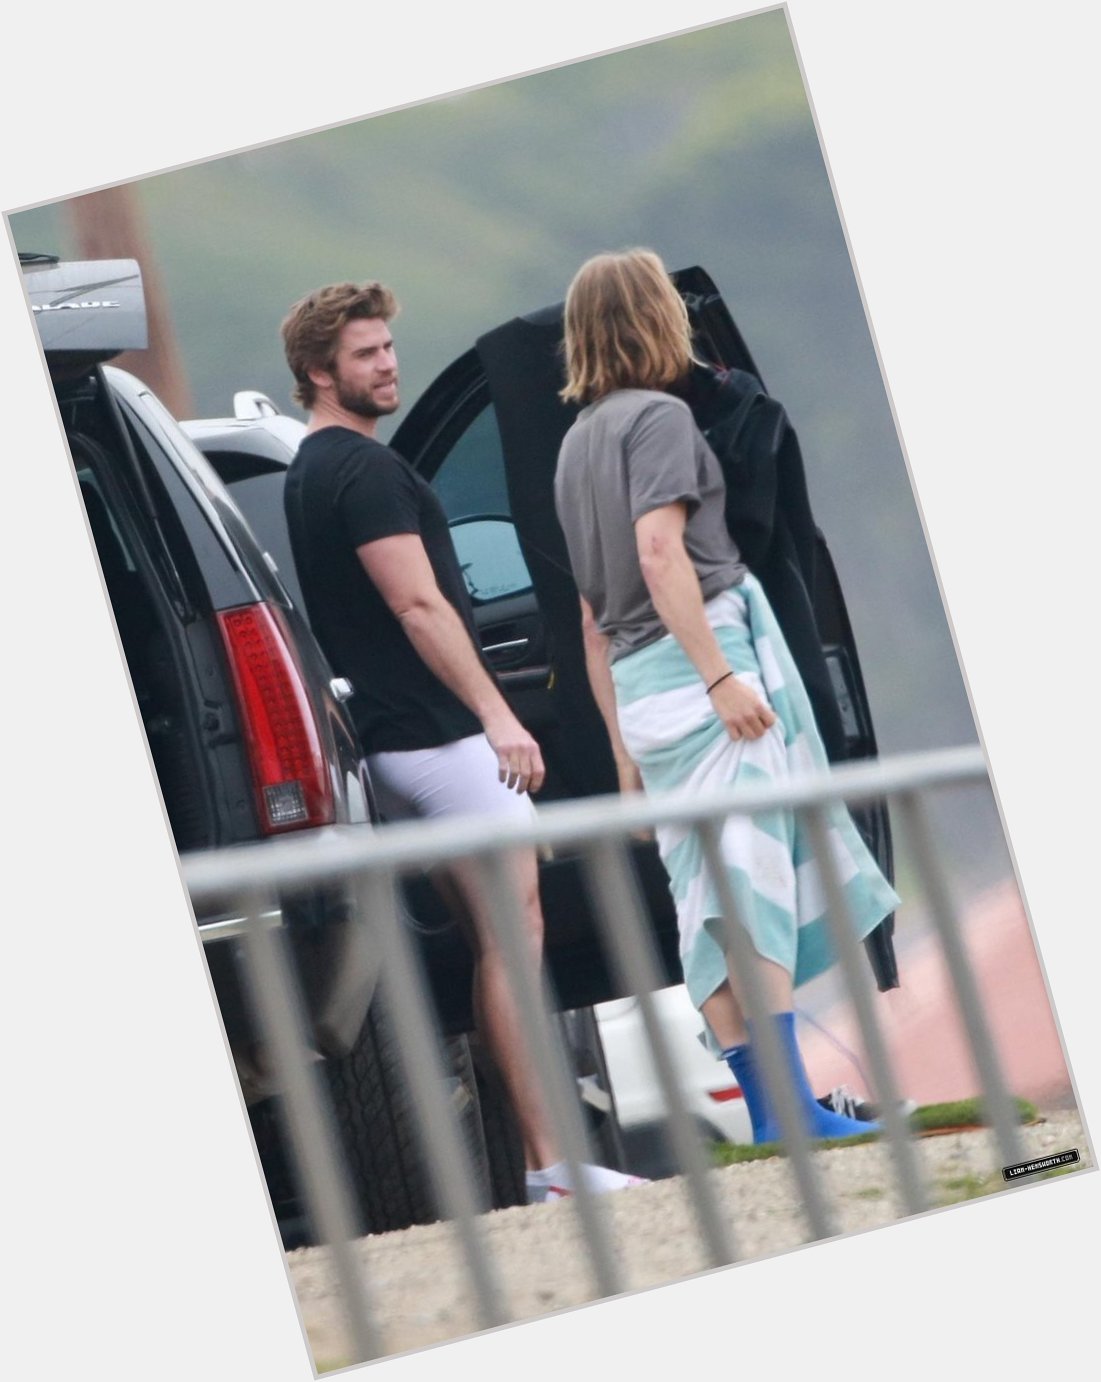 Happy Birthday to Liam Hemsworth 

Wishing to have more of these kind of pics soon    